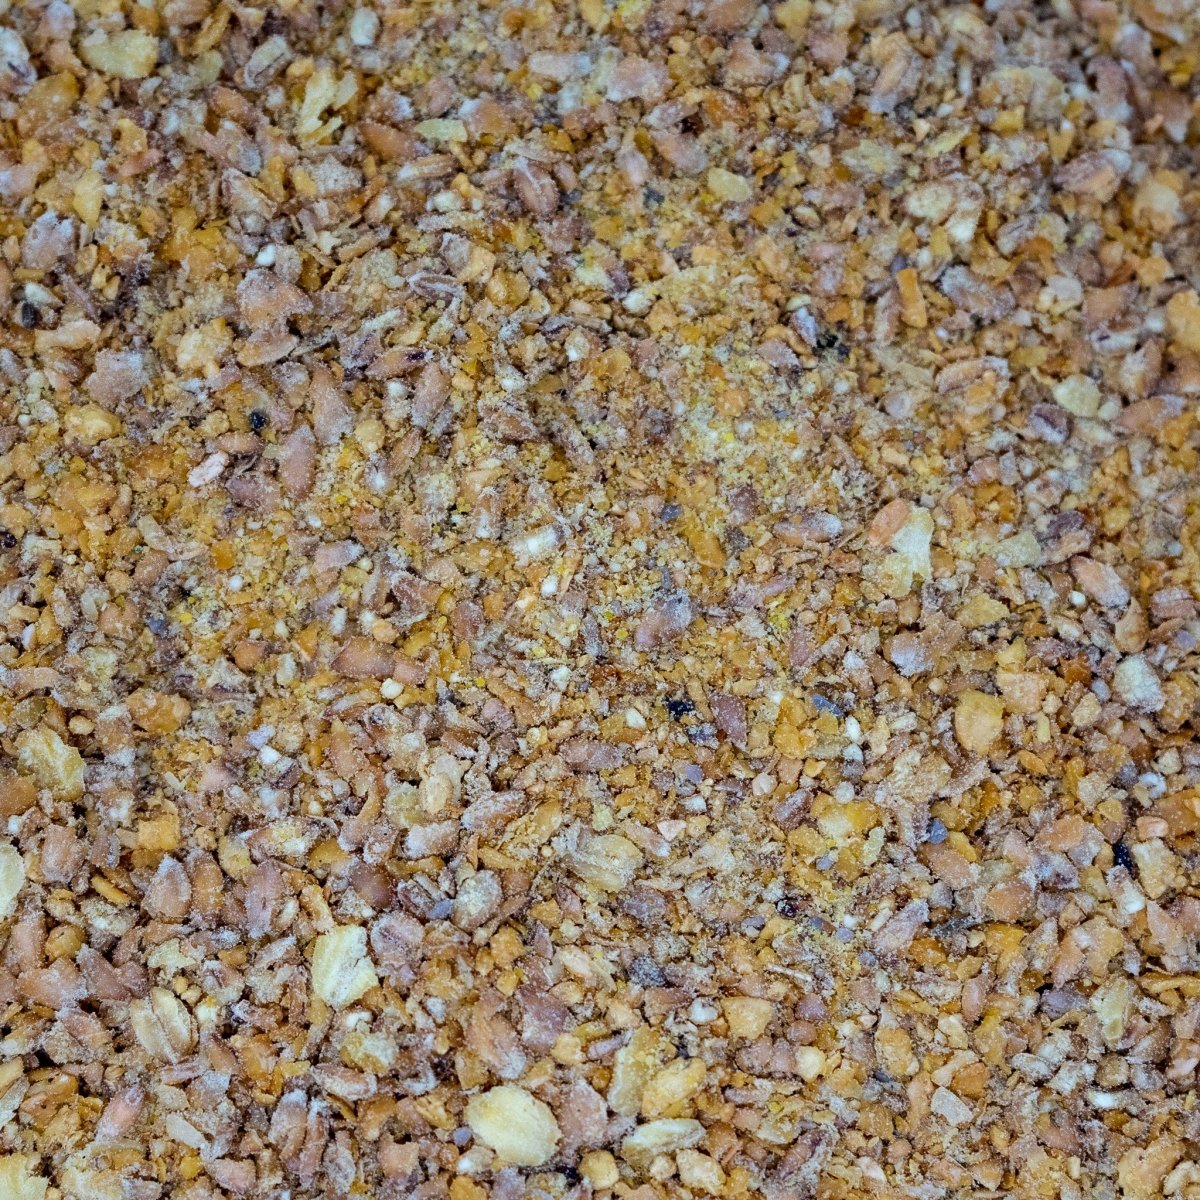 Complete Food For Chickens, Coarse Poultry Chicken Feed Layers Meal 4kg - Seedzbox5060910340578